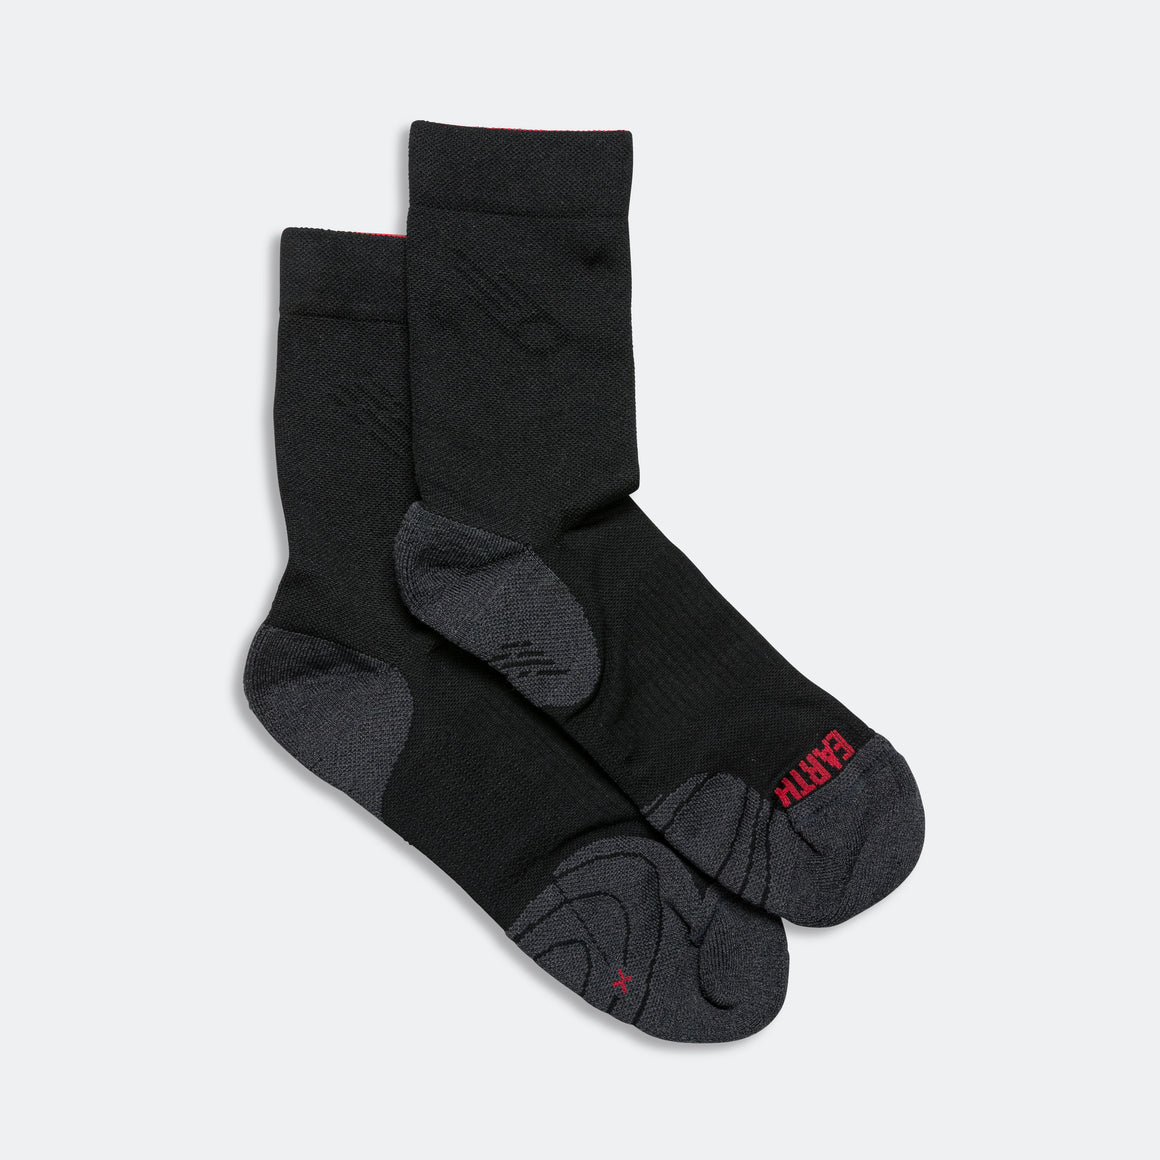 Near Earth - The Distance Socks - Black - Up There Athletics